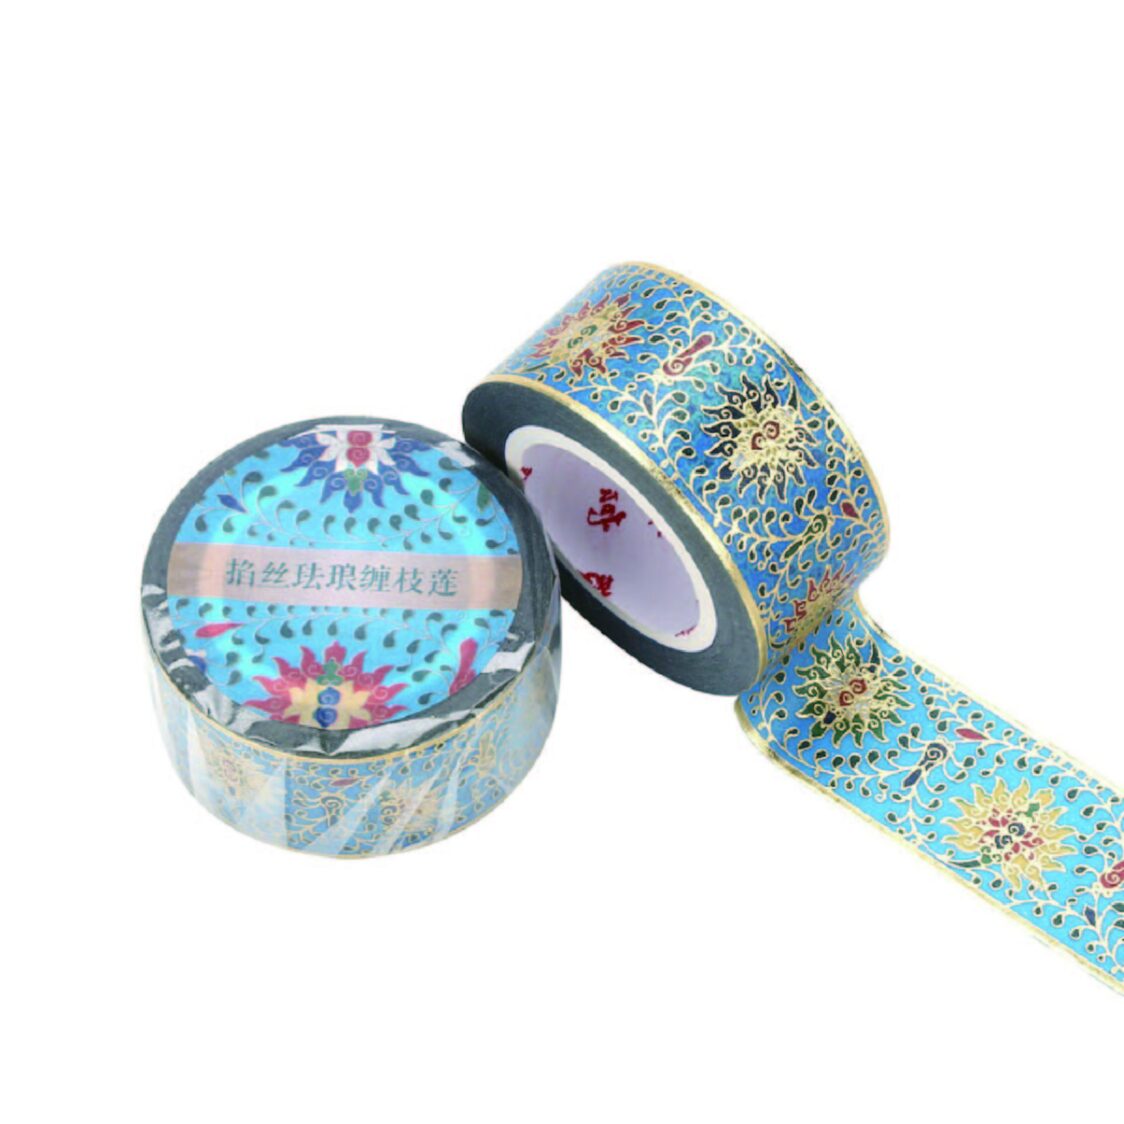 Xuan Culture  Lifestyle Enamel-Inspired Lotus Motif with Gold Foil Decorative Tape